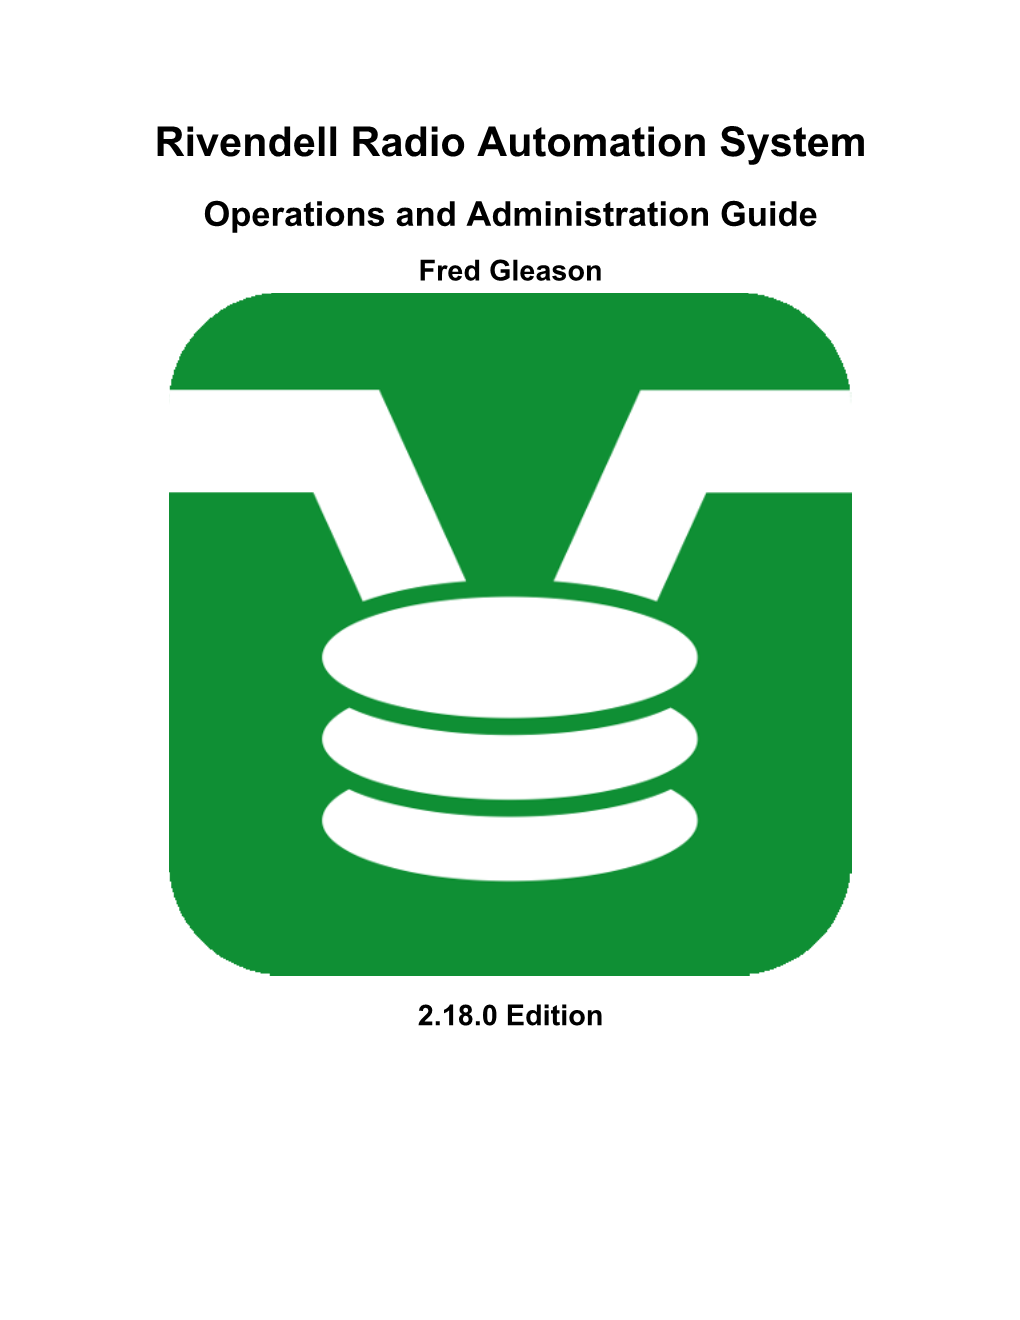 Rivendell Radio Automation System Operations and Administration Guide Fred Gleason